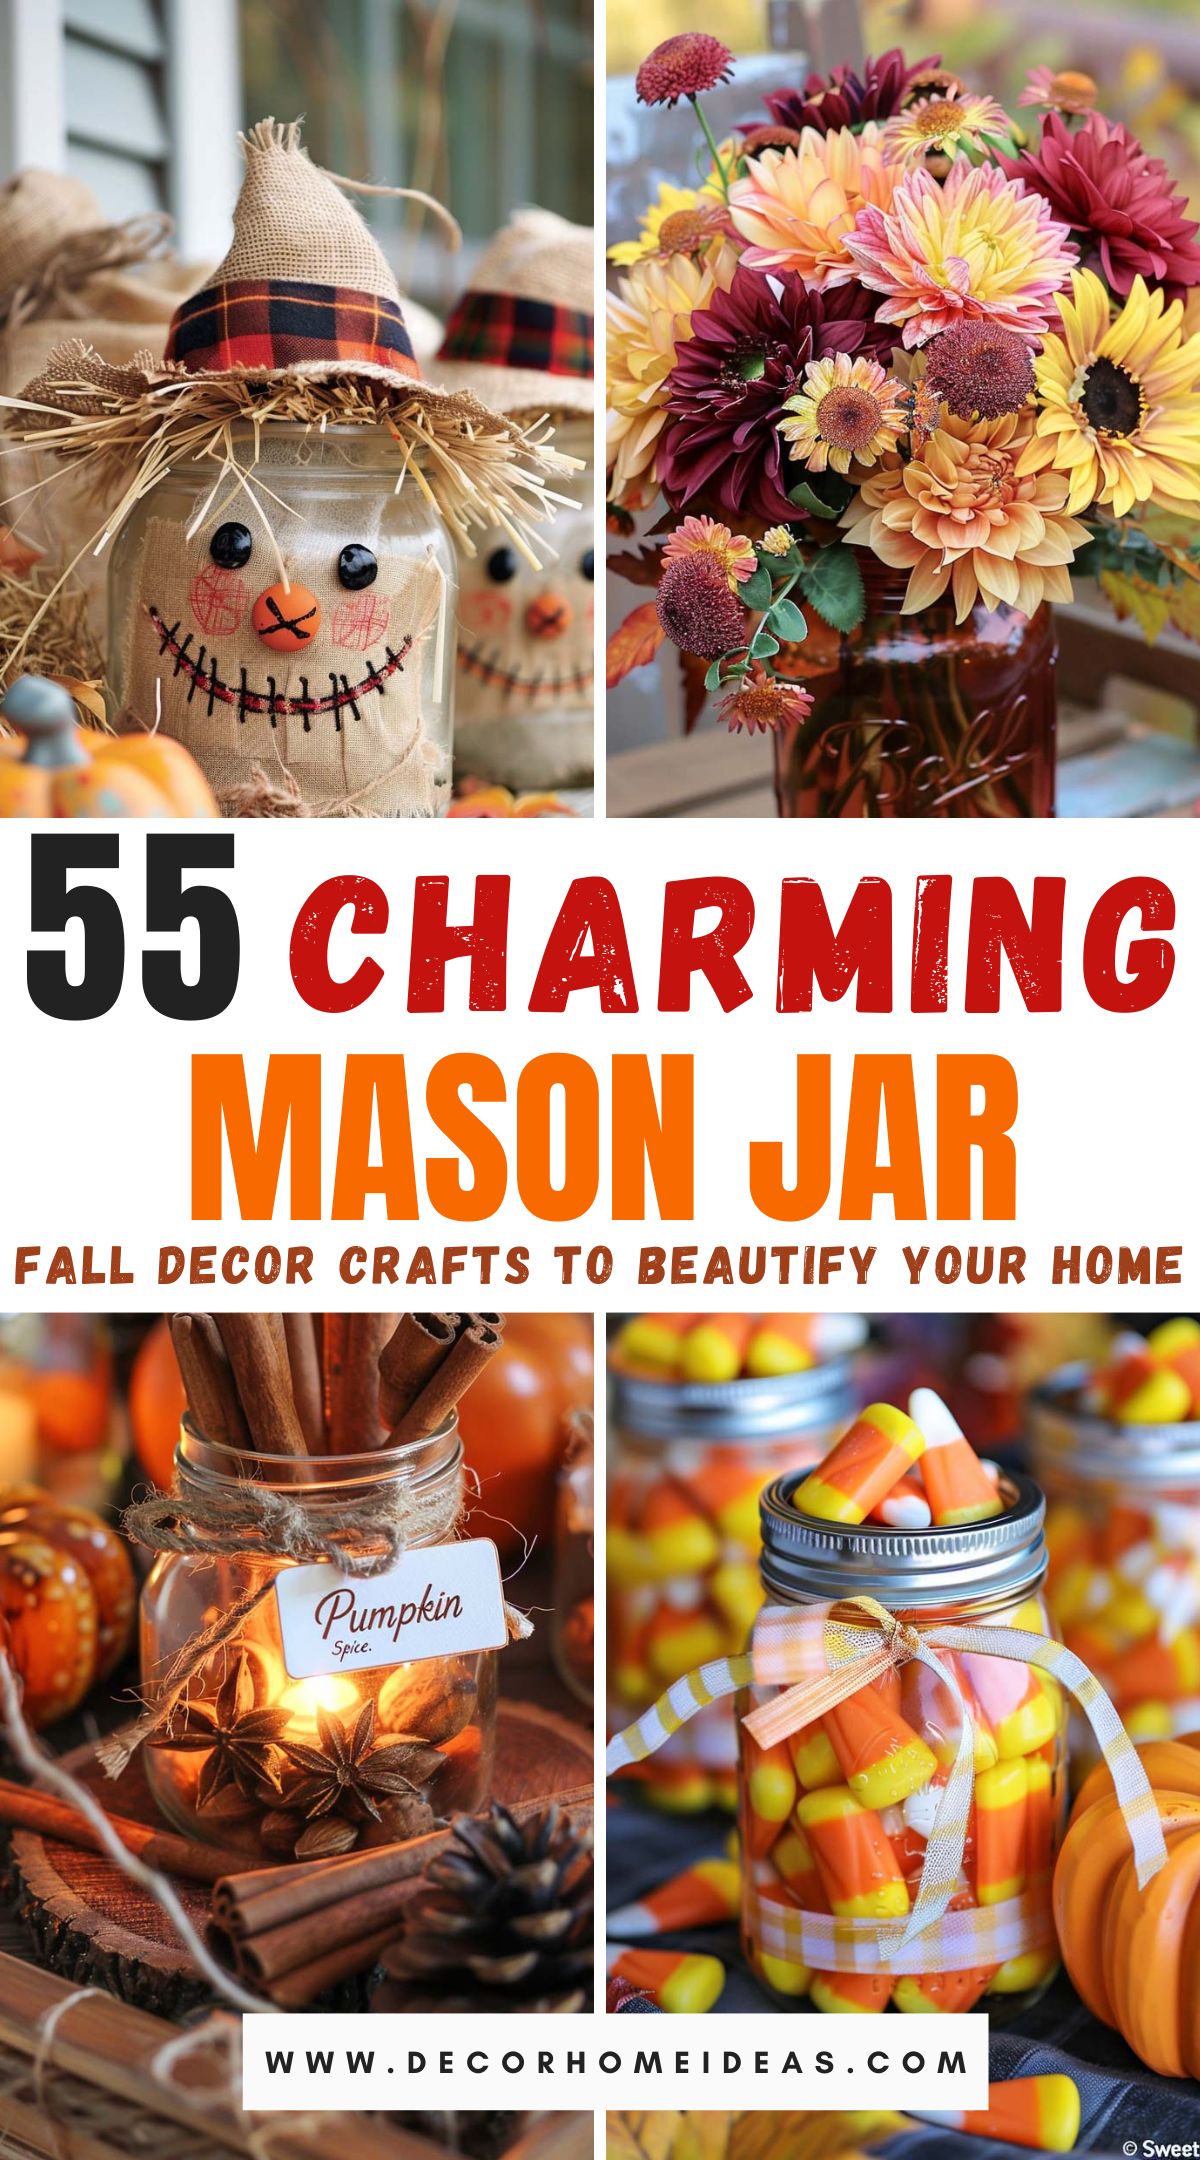 Enhance your home’s autumn ambiance with these 55 lovely mason jar fall decor crafts. This post offers a variety of creative ideas, from candle holders and vases to lanterns and centerpieces. Discover how to transform simple mason jars into charming, seasonal decorations that bring warmth and beauty to your space.